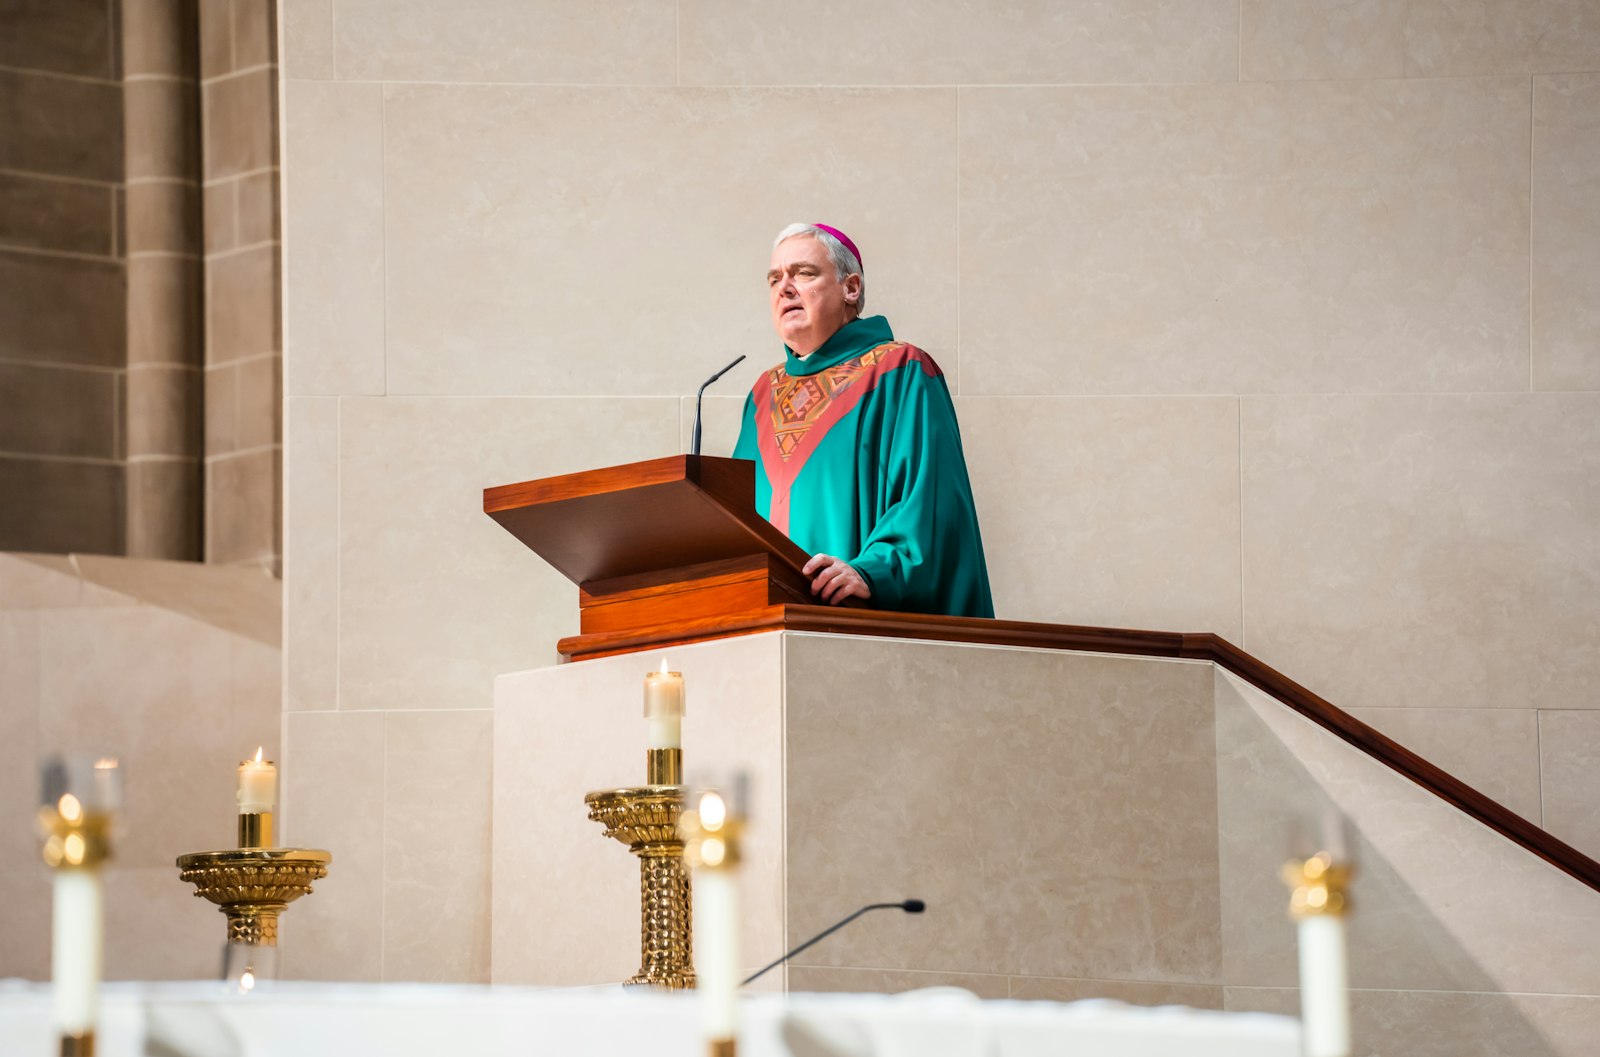 Auxiliary Bishop Robert J. Fisher preaches in this file photo at the Cathedral of the Most Blessed Sacrament. Bishop Fisher has served in prison ministry for 30 years. (Detroit Catholic file photo)